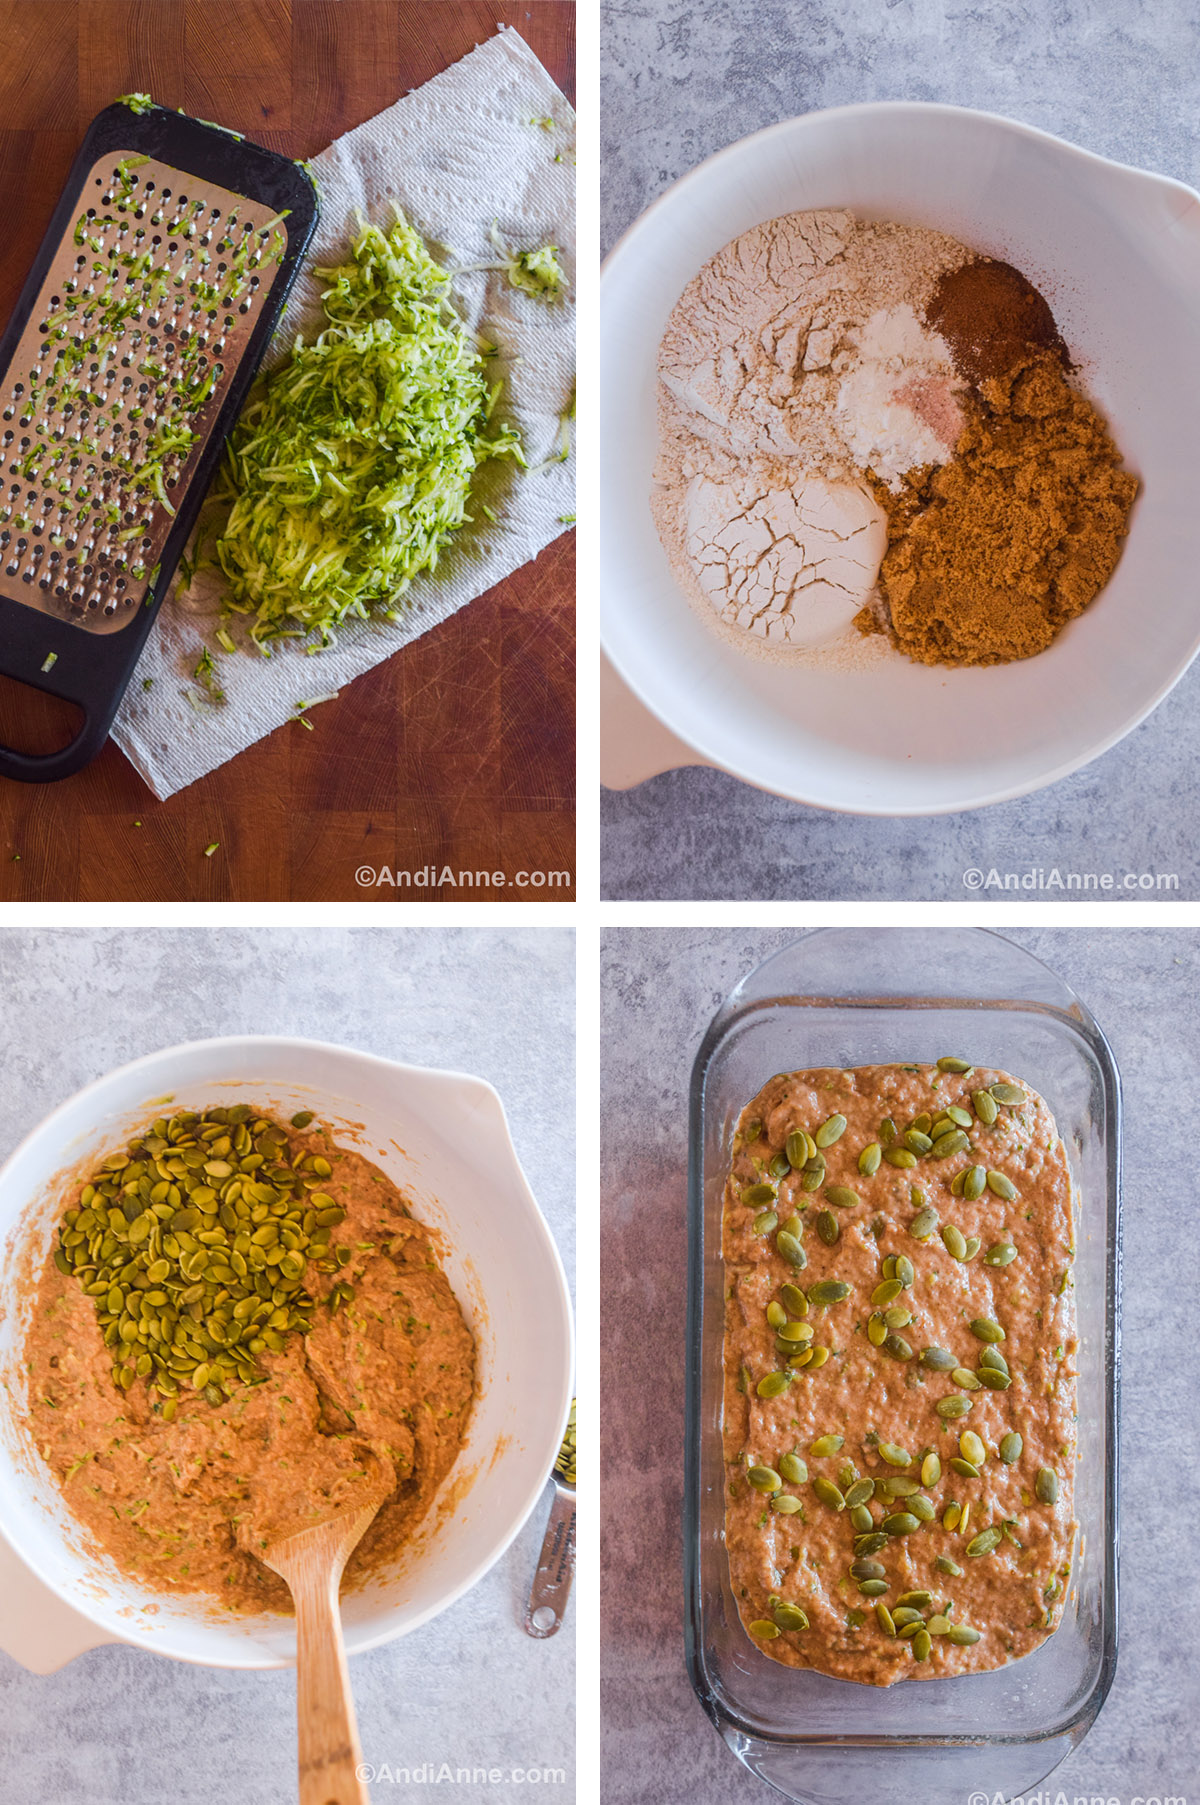 Four images showing steps to make recipe. First is grated zucchini with a cheese grater. Second is a white bowl with flours and sugar dumped in unmixed. Third is wet batter with pumpkin seeds dumped on top. Fourth is wet batter in a loaf pan with pumpkin seeds sprinkled on top.